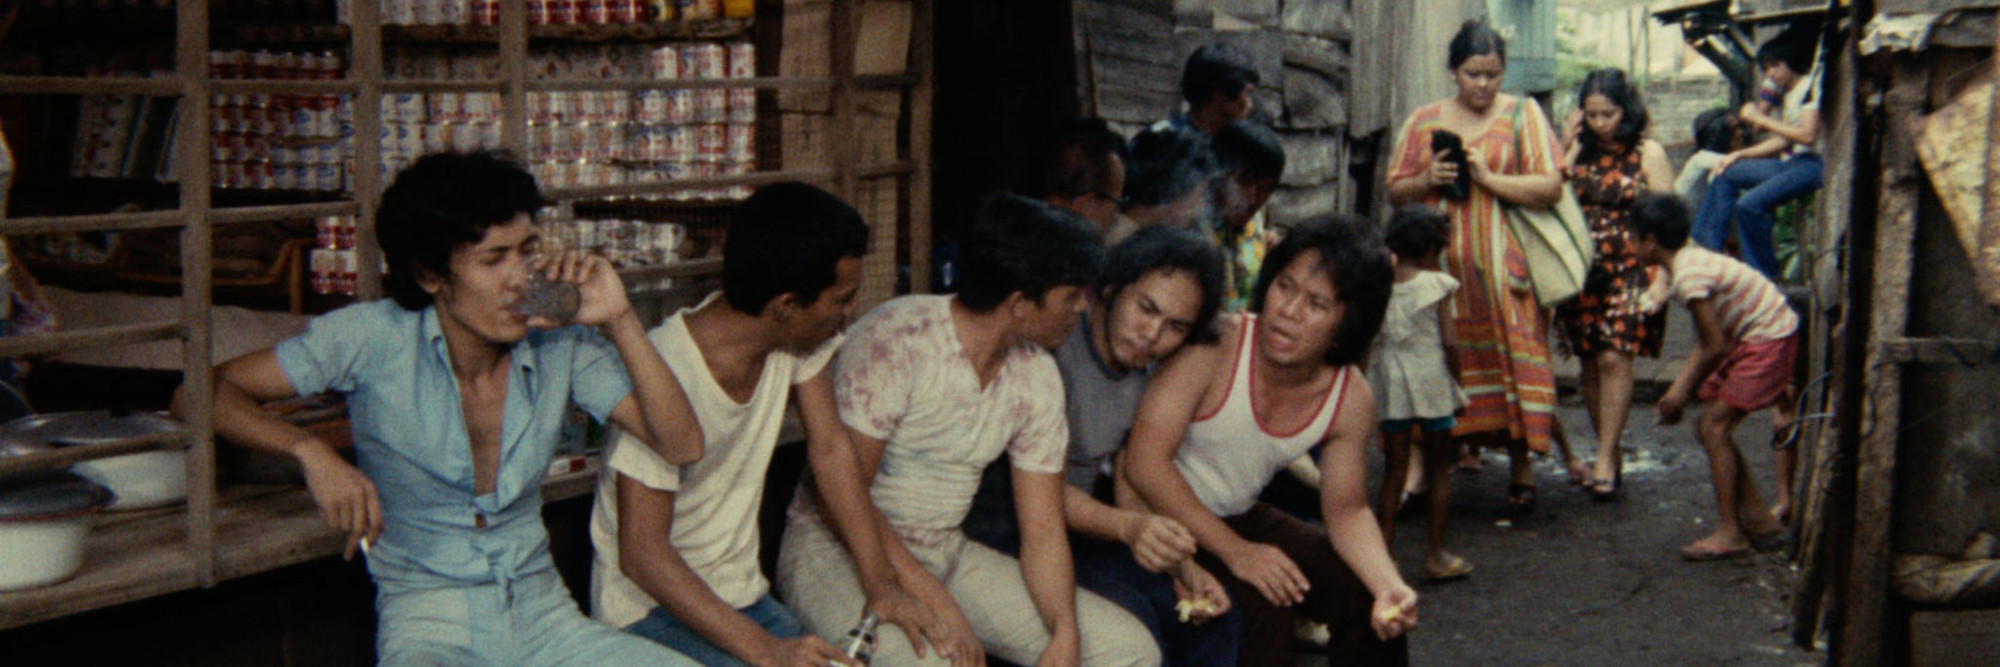 Insiang. 1976. Philippines. Directed by Lino Brocka